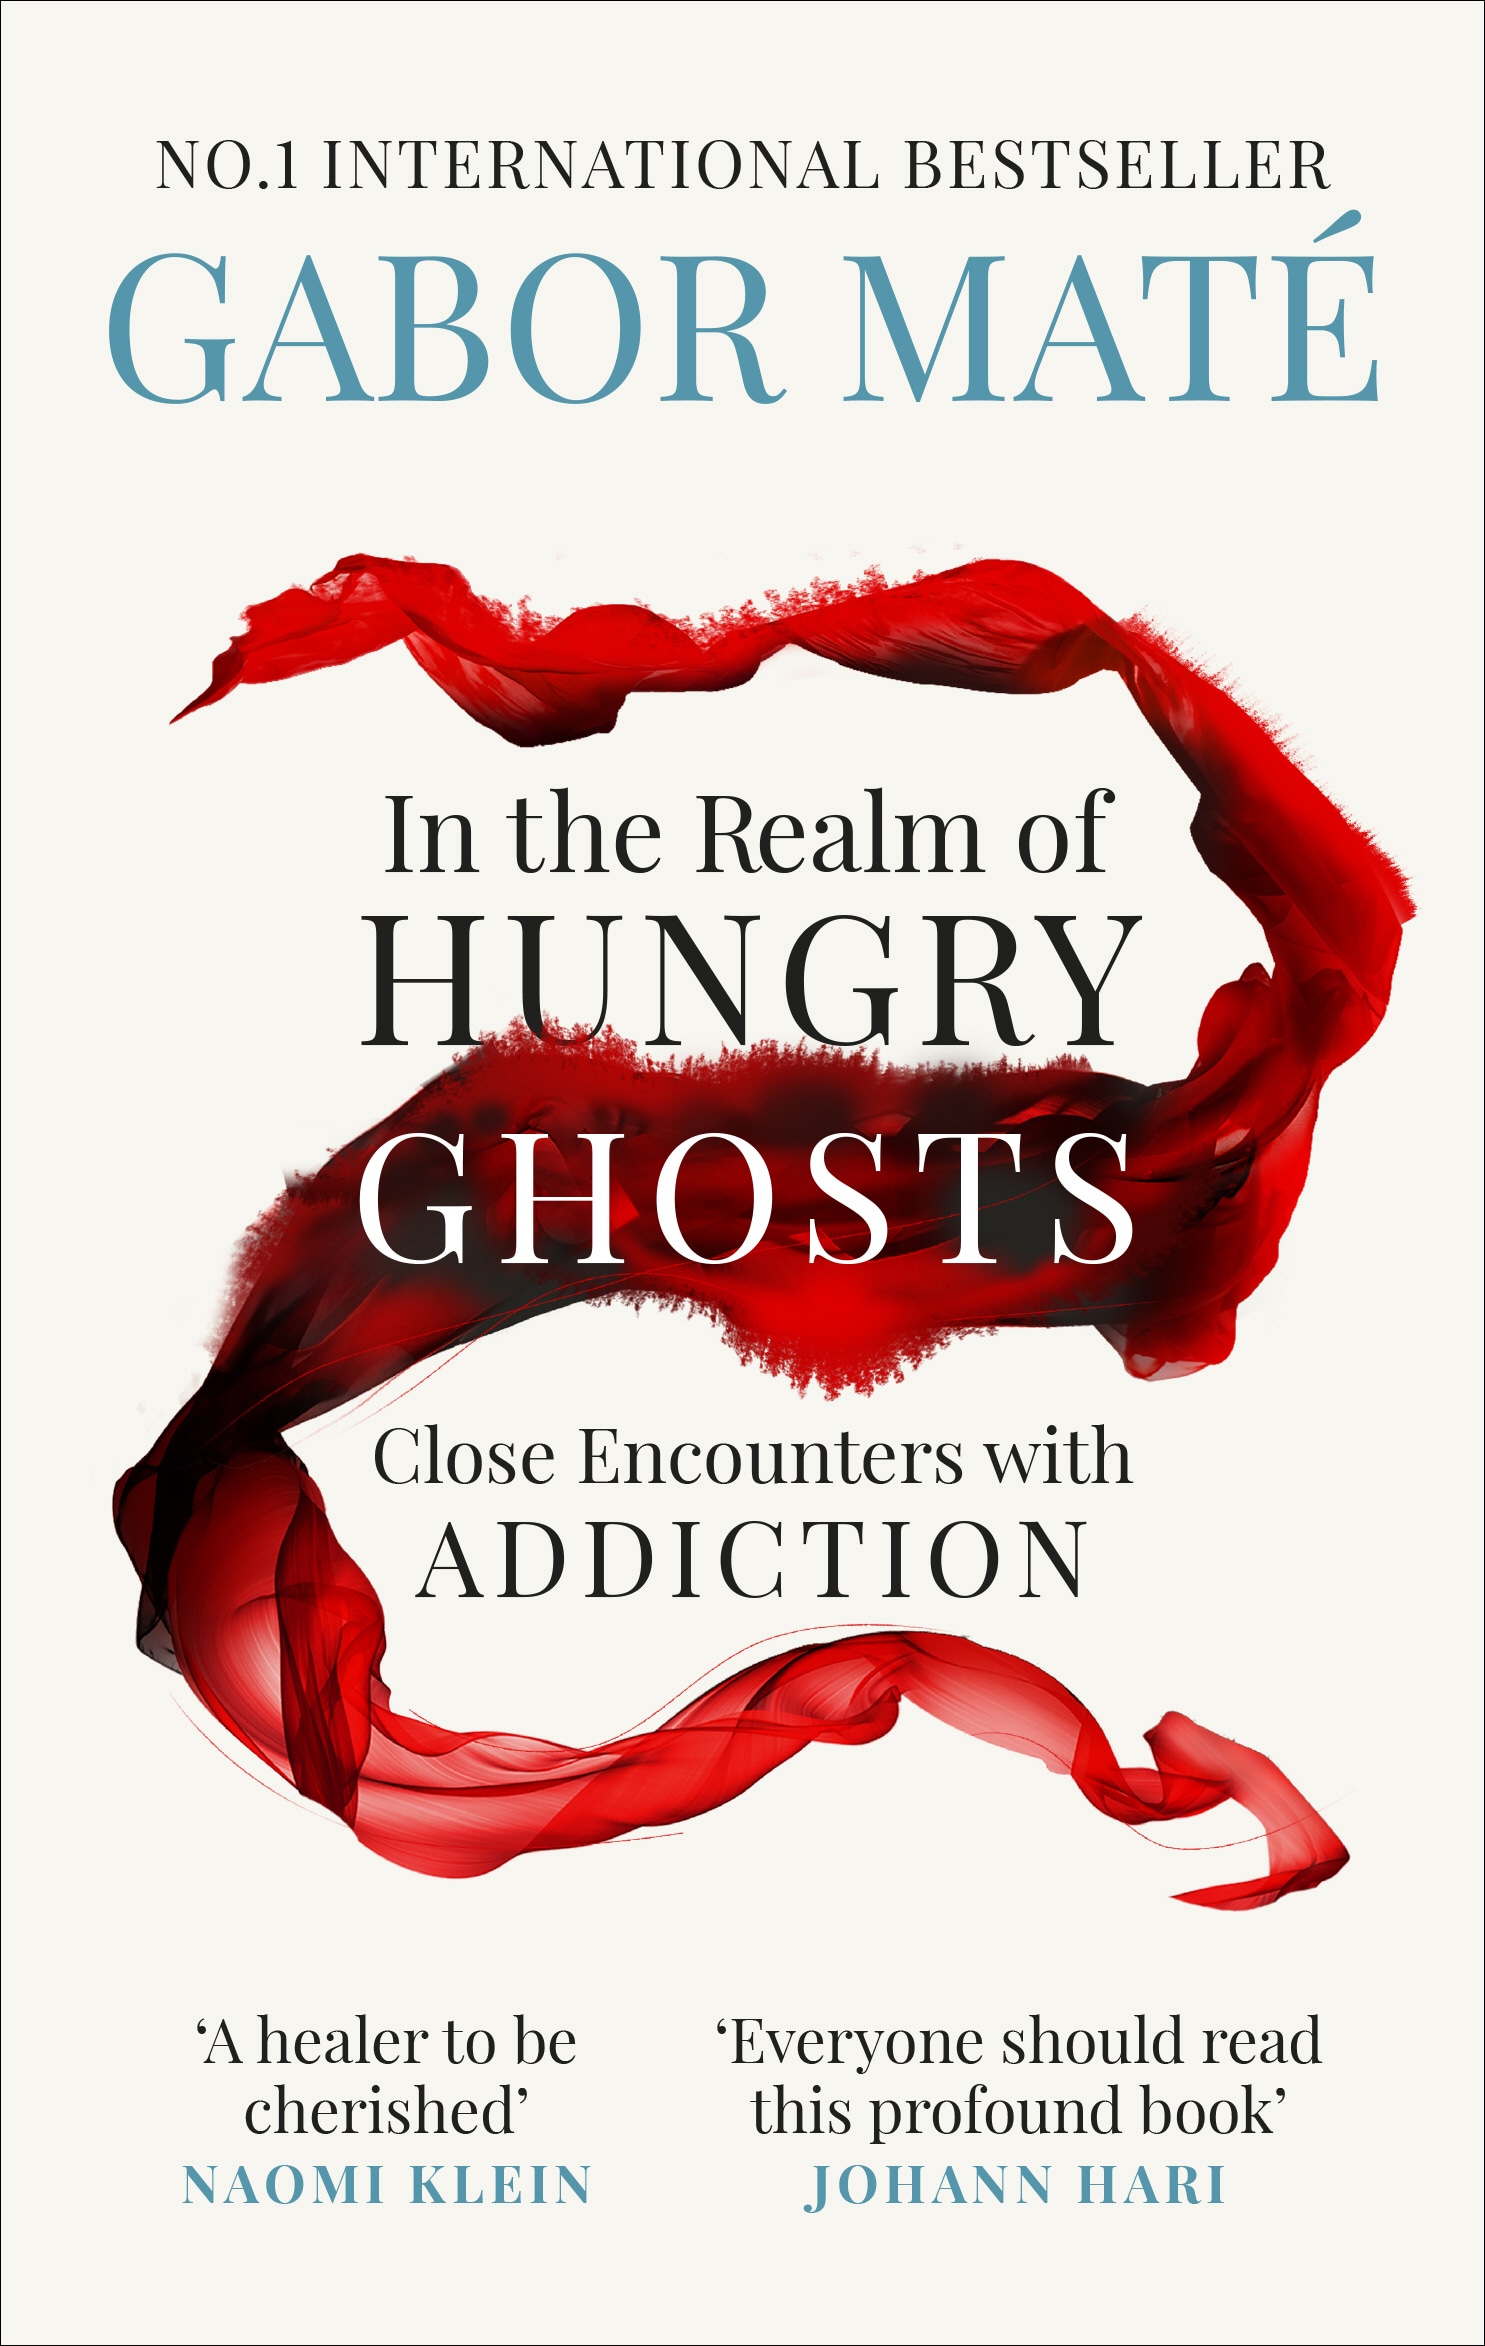 Book “In the Realm of Hungry Ghosts” by Gabor Maté — October 4, 2018